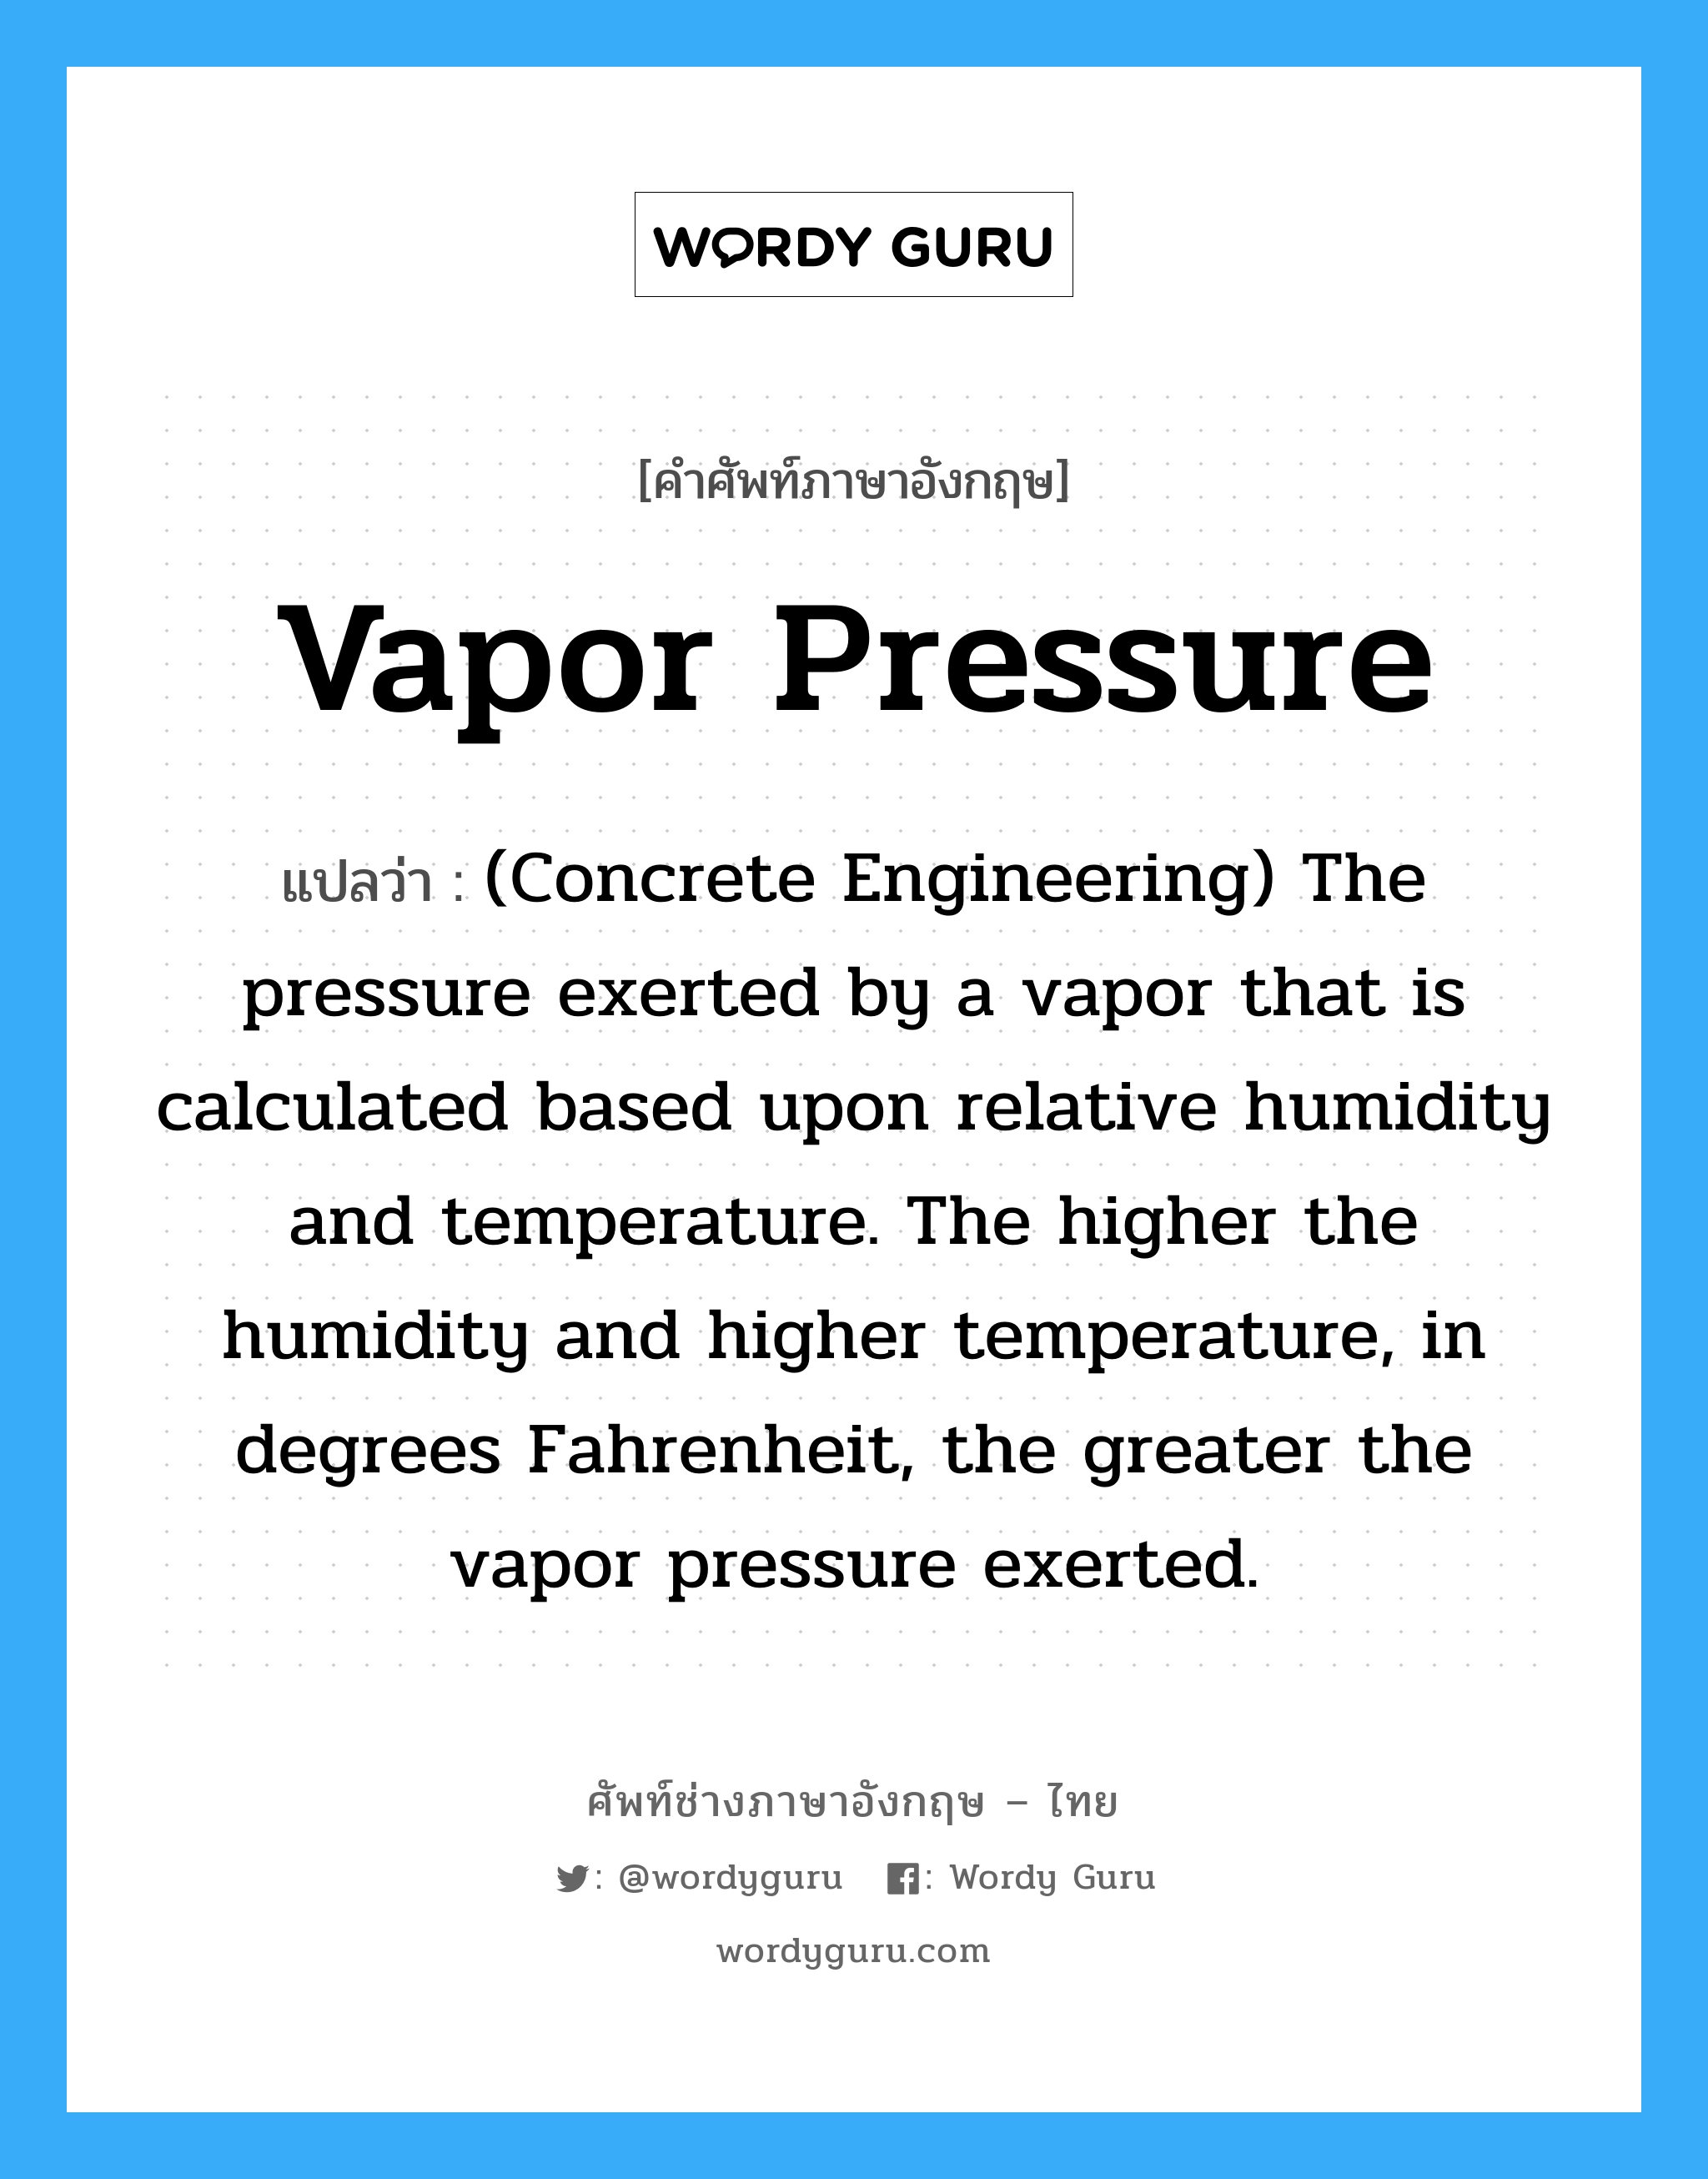 Vapor Pressure แปลว่า?, คำศัพท์ช่างภาษาอังกฤษ - ไทย Vapor Pressure คำศัพท์ภาษาอังกฤษ Vapor Pressure แปลว่า (Concrete Engineering) The pressure exerted by a vapor that is calculated based upon relative humidity and temperature. The higher the humidity and higher temperature, in degrees Fahrenheit, the greater the vapor pressure exerted.